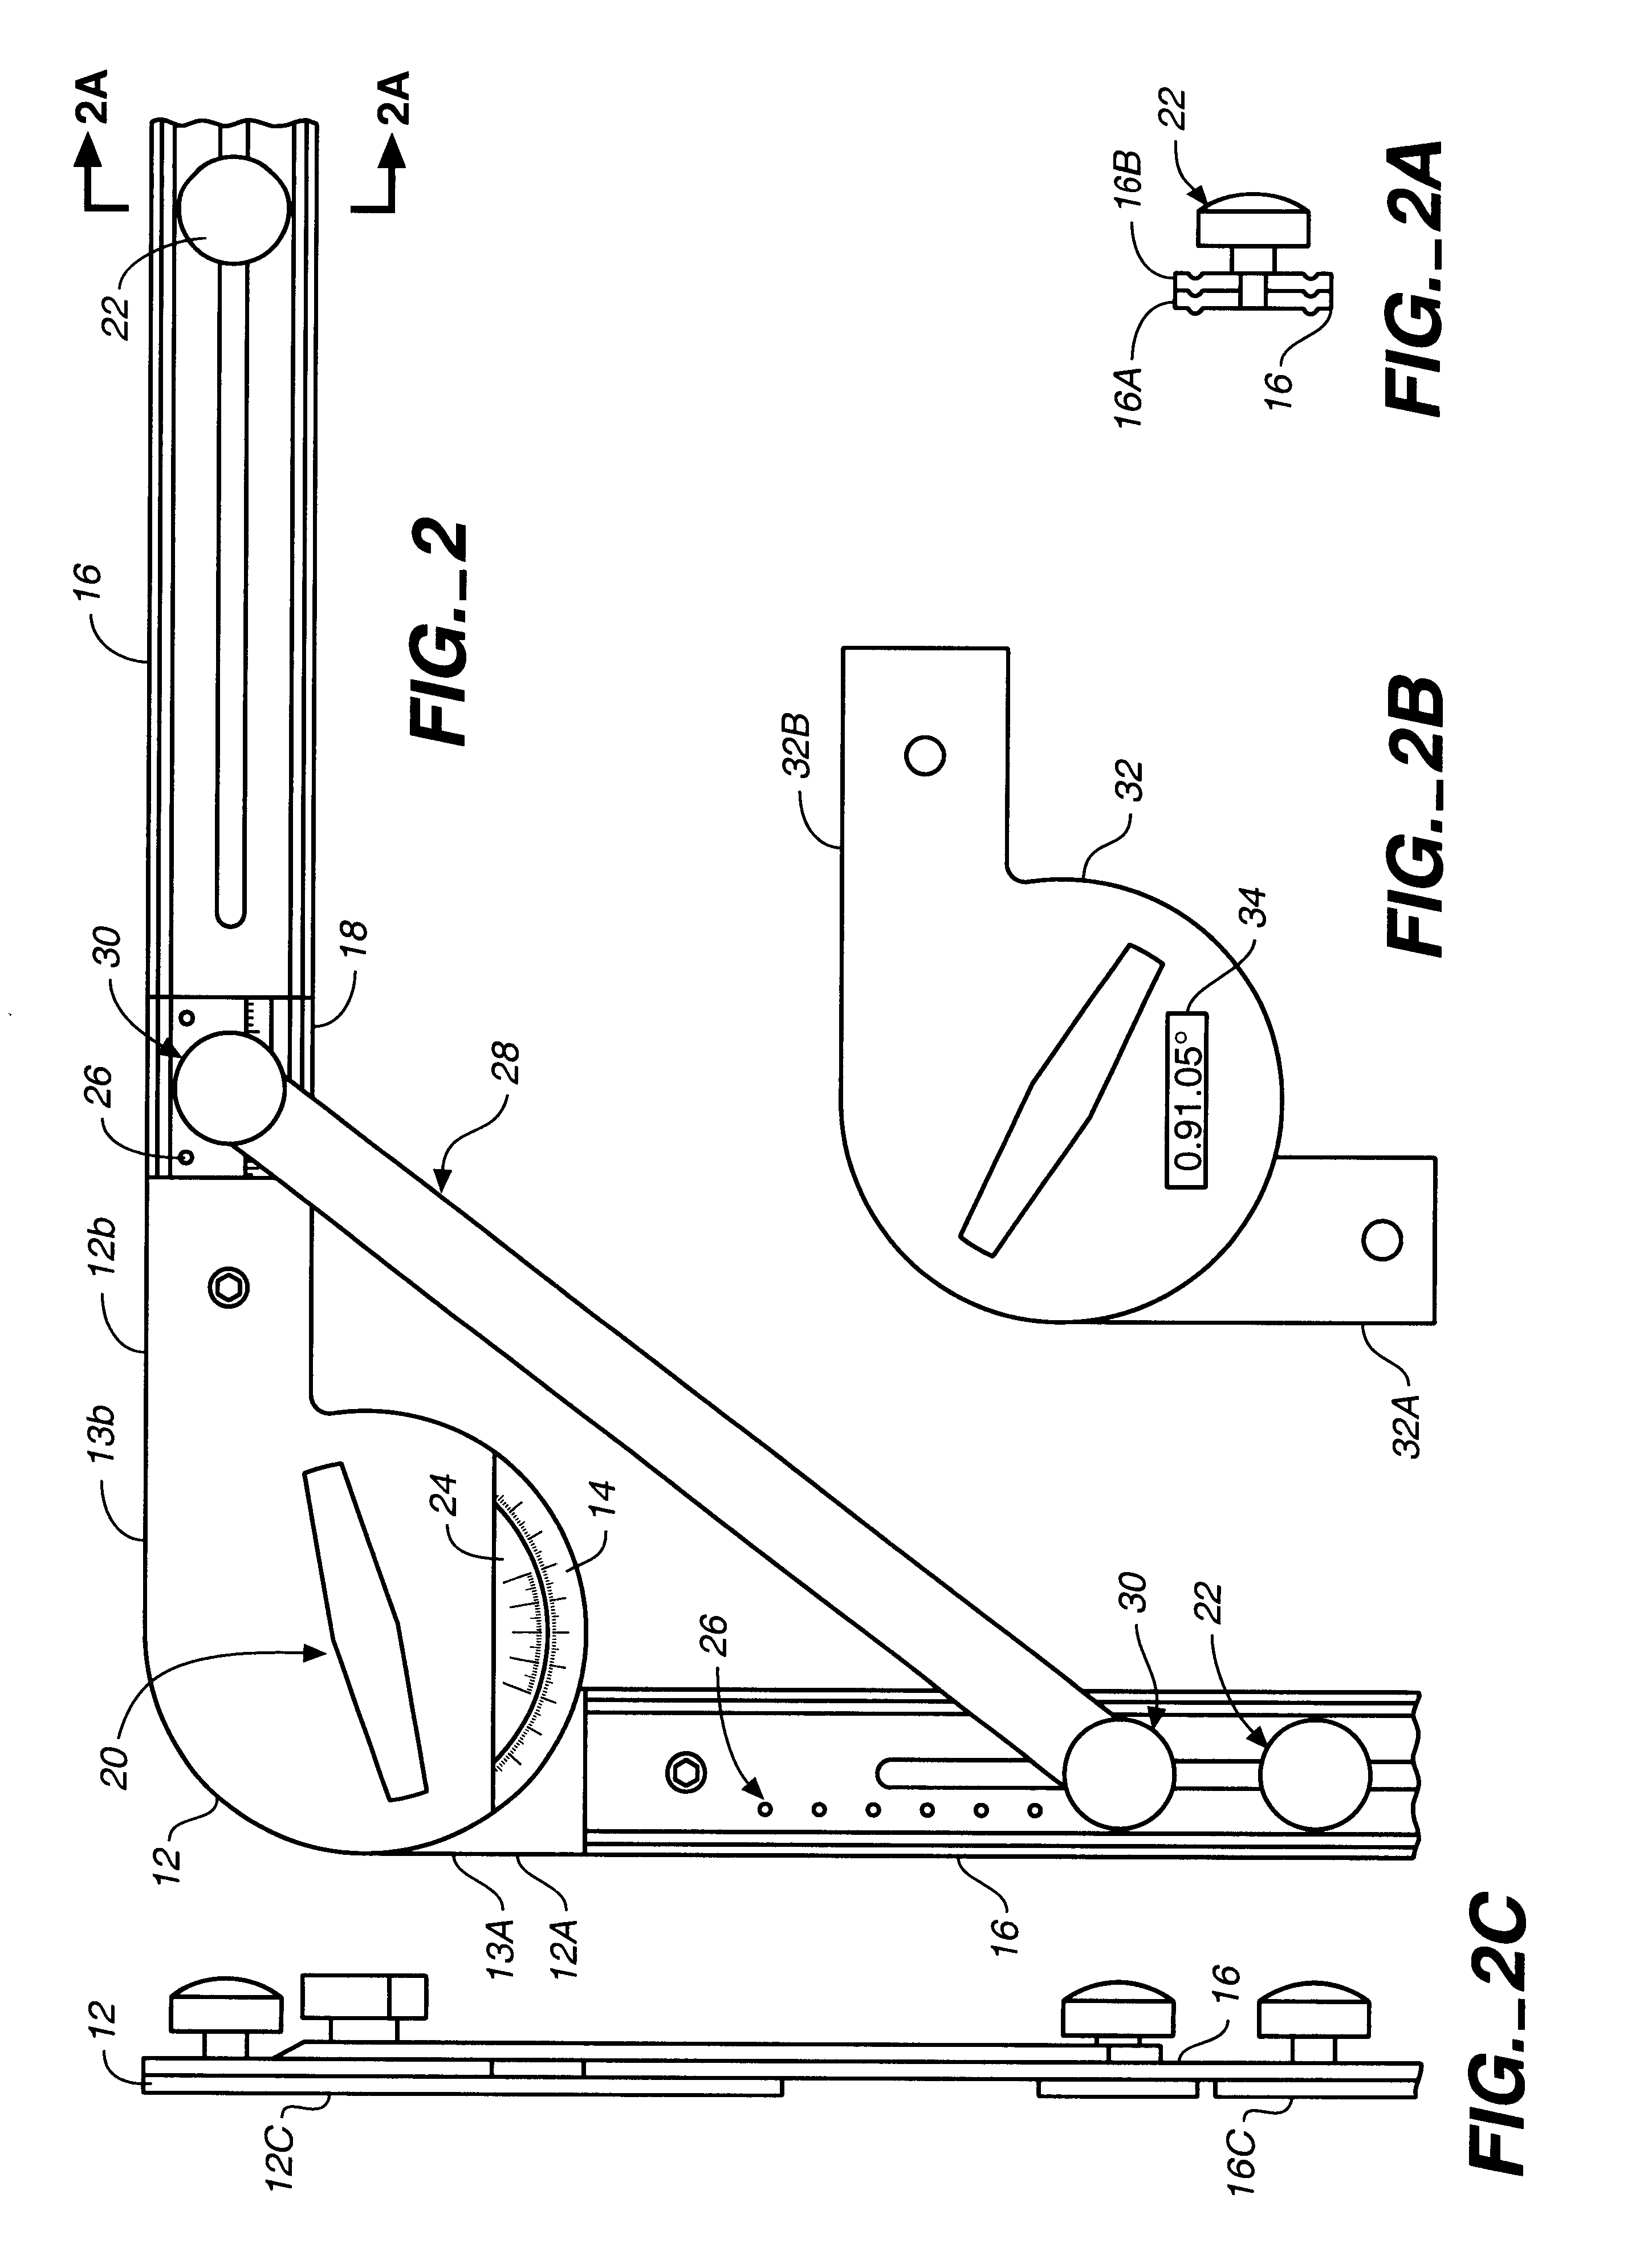 Method and apparatus for generating a template